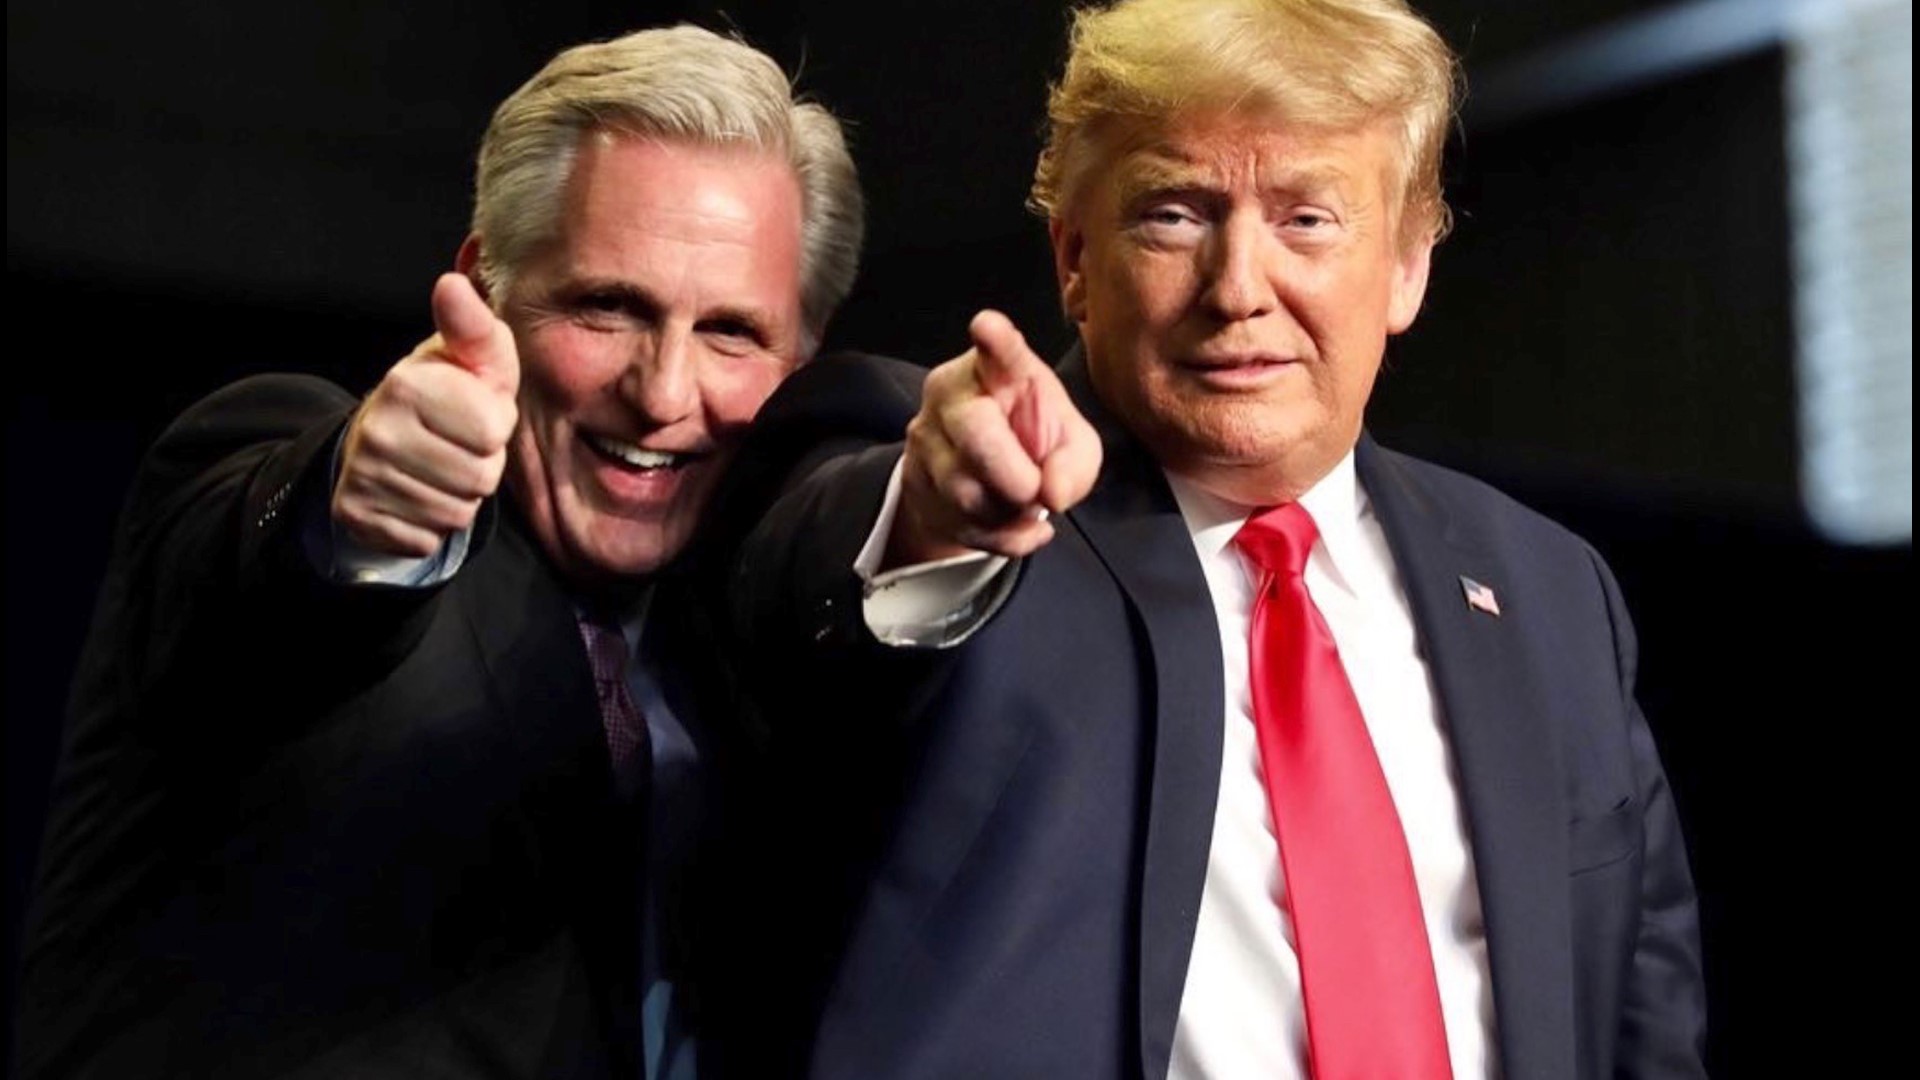 House Minority Leader Kevin McCarthy supported former president Trump's response to the deadly January 6th Capitol riot, after Trump said he would 'put something out to make sure to stop this.' Veuer's Maria Mercedes Galuppo has more.